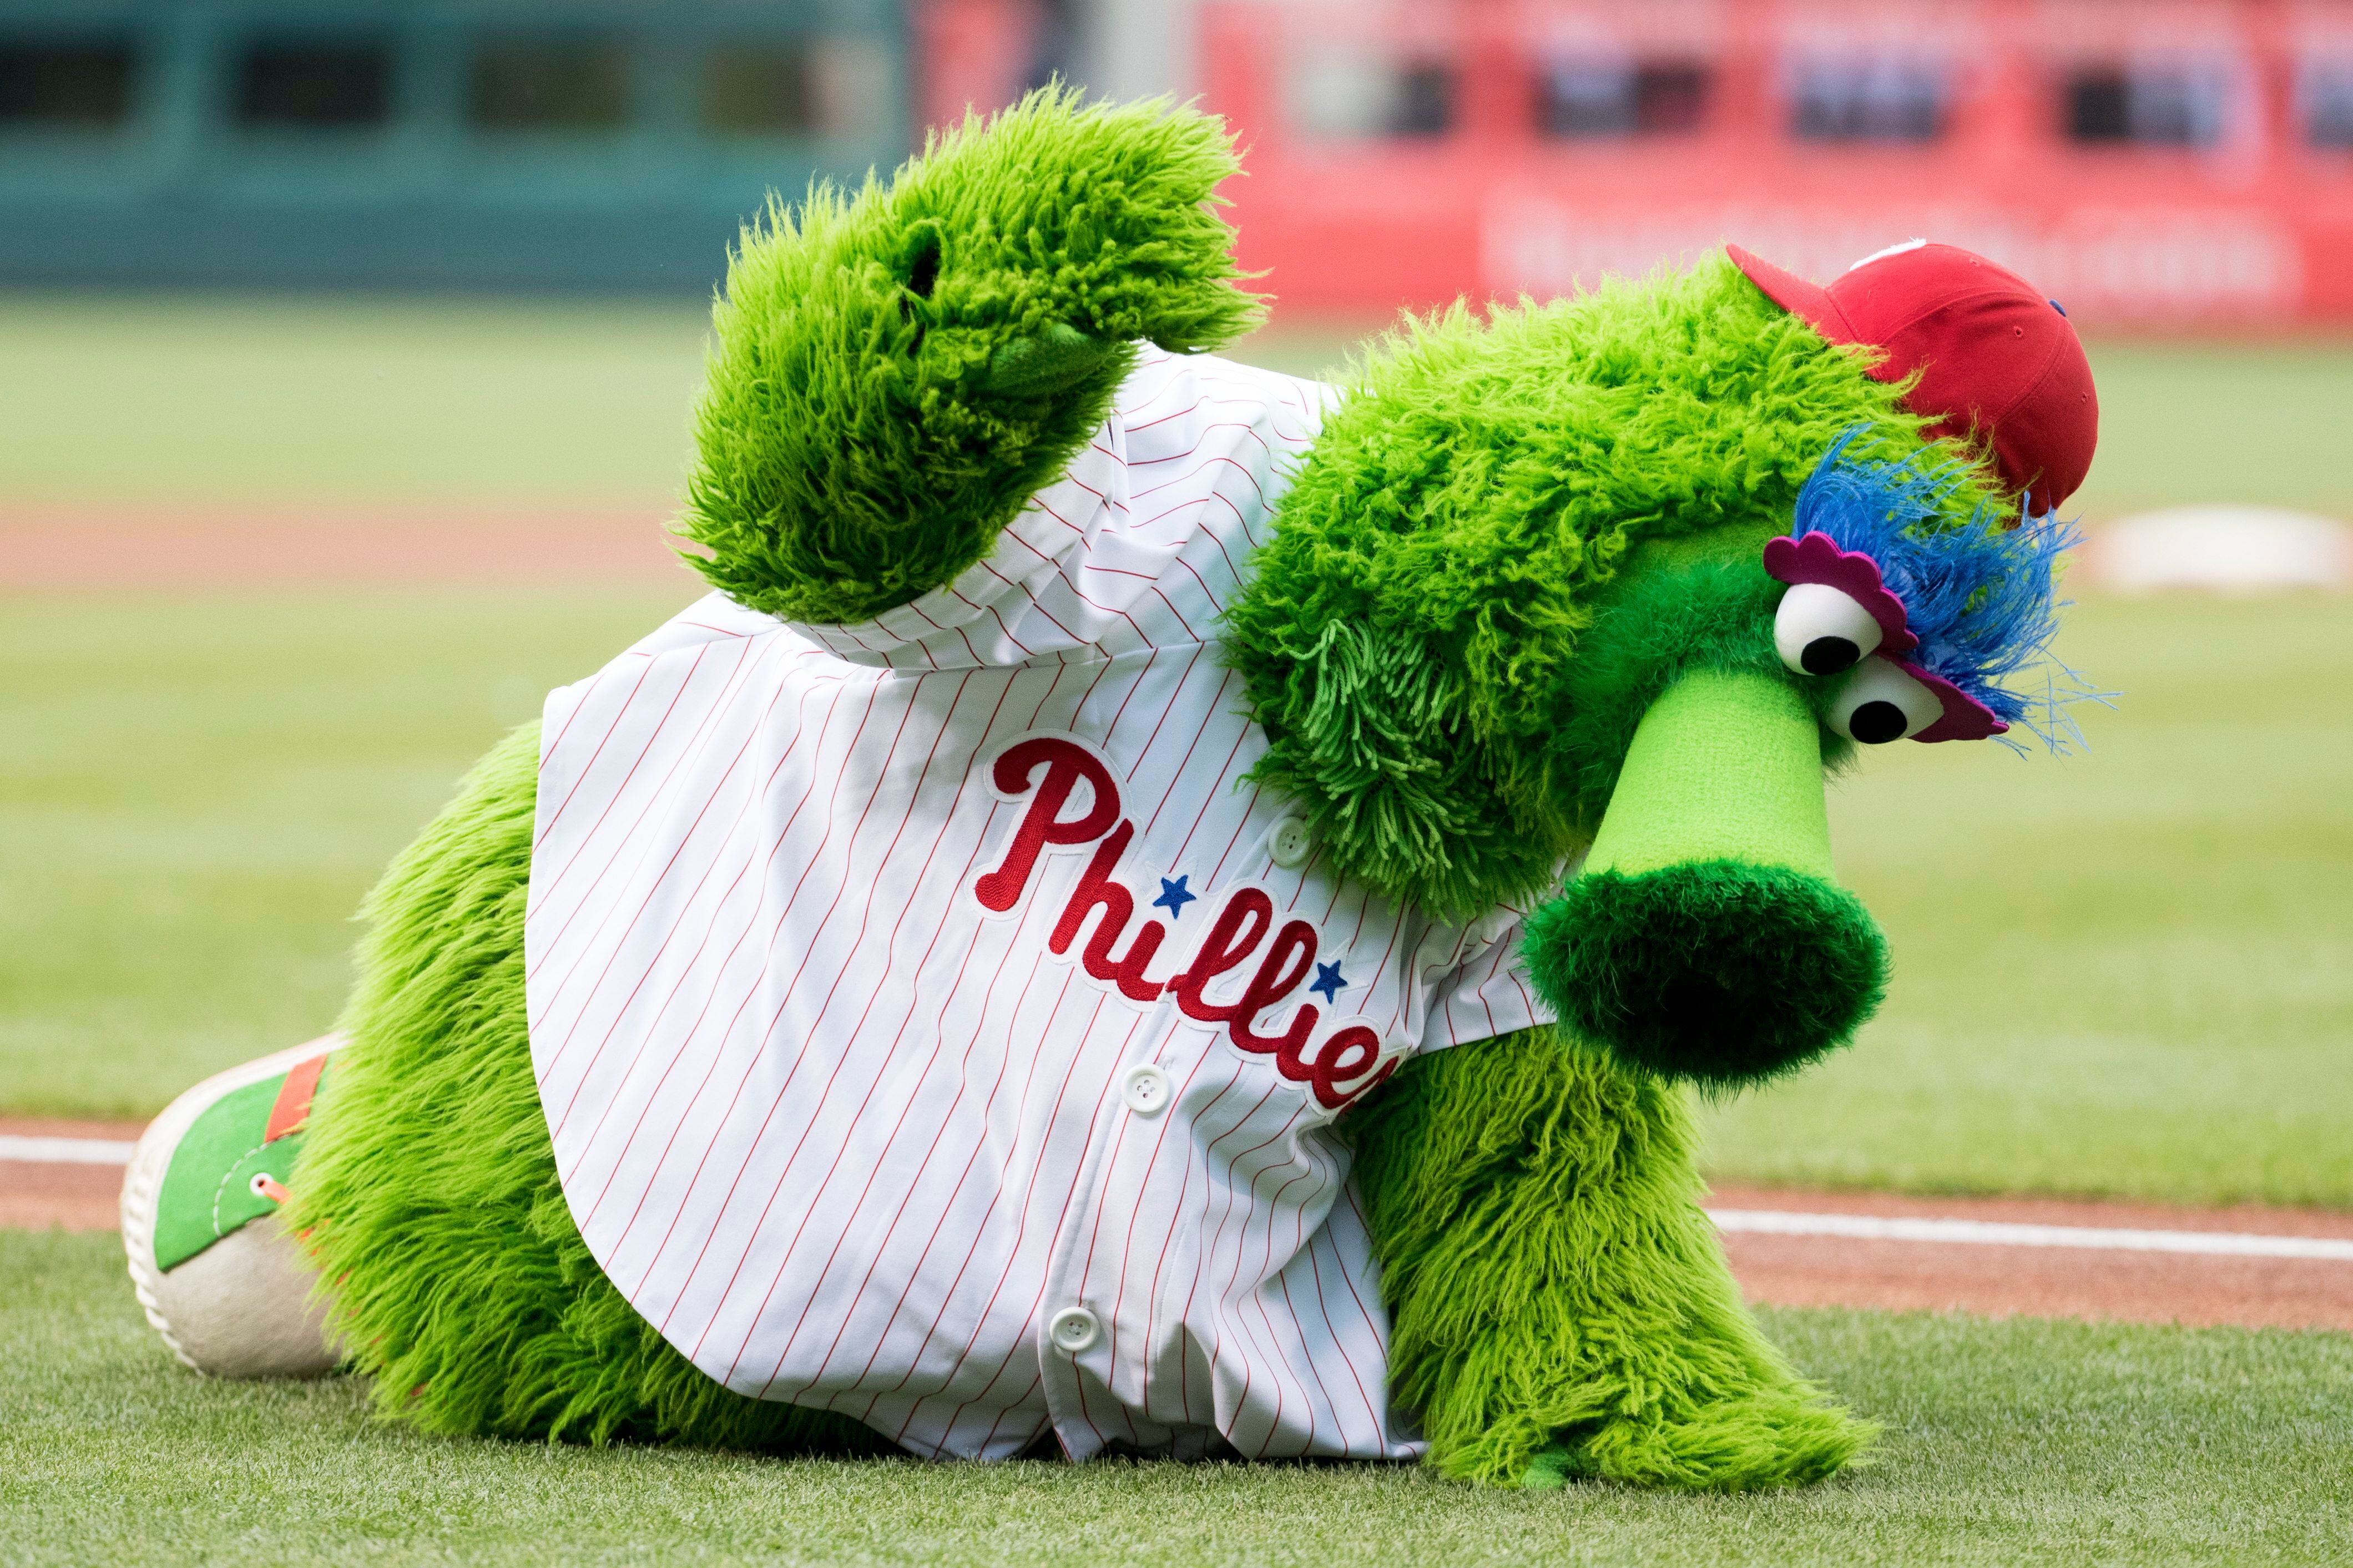 Phillie Phanatic and Pirate Parrot are now friends; here's how the